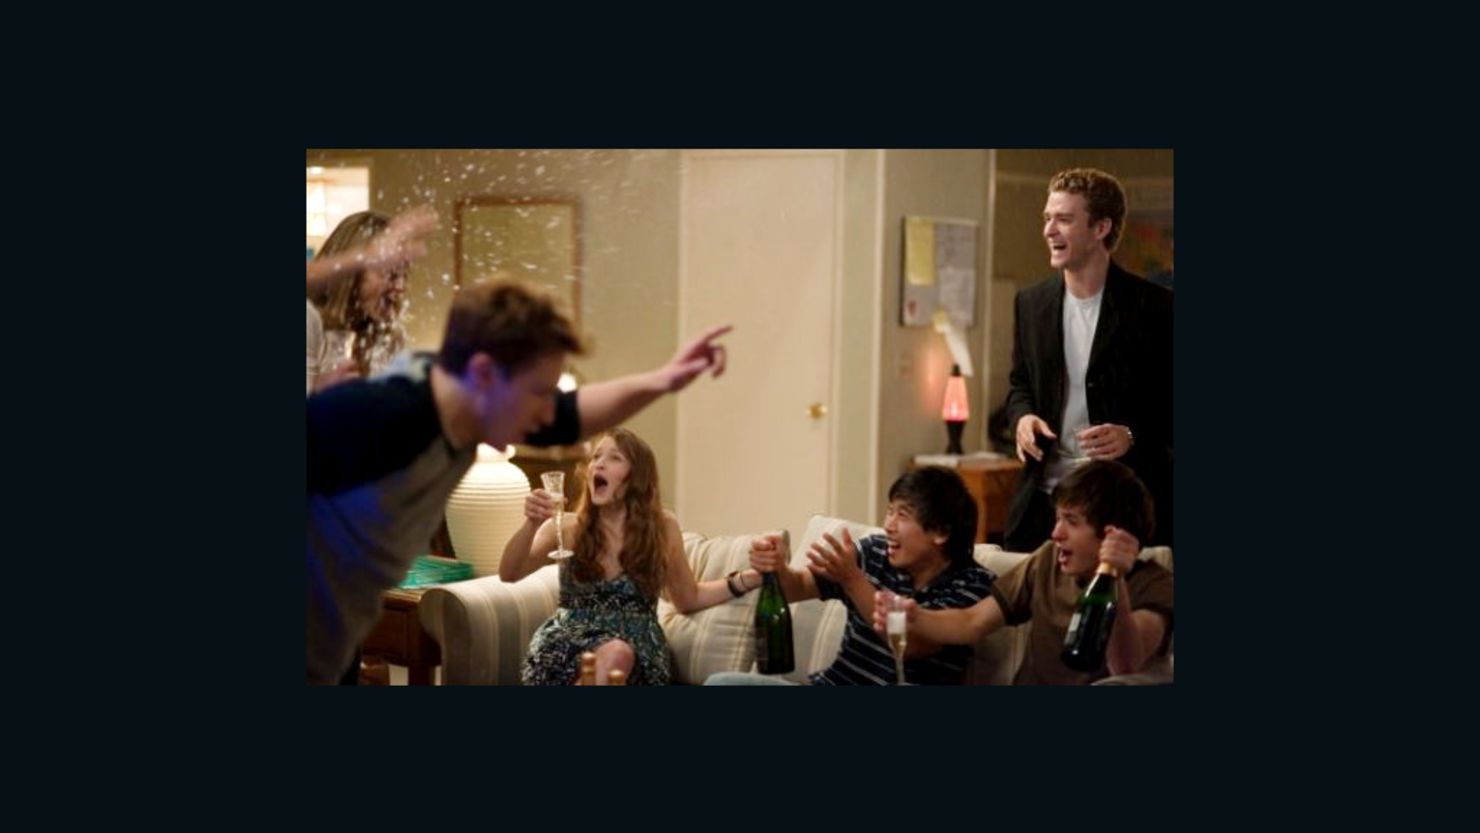 "The Social Network," which chronicled Facebook's rise, is attributed with bringing tech culture to the mainstream.